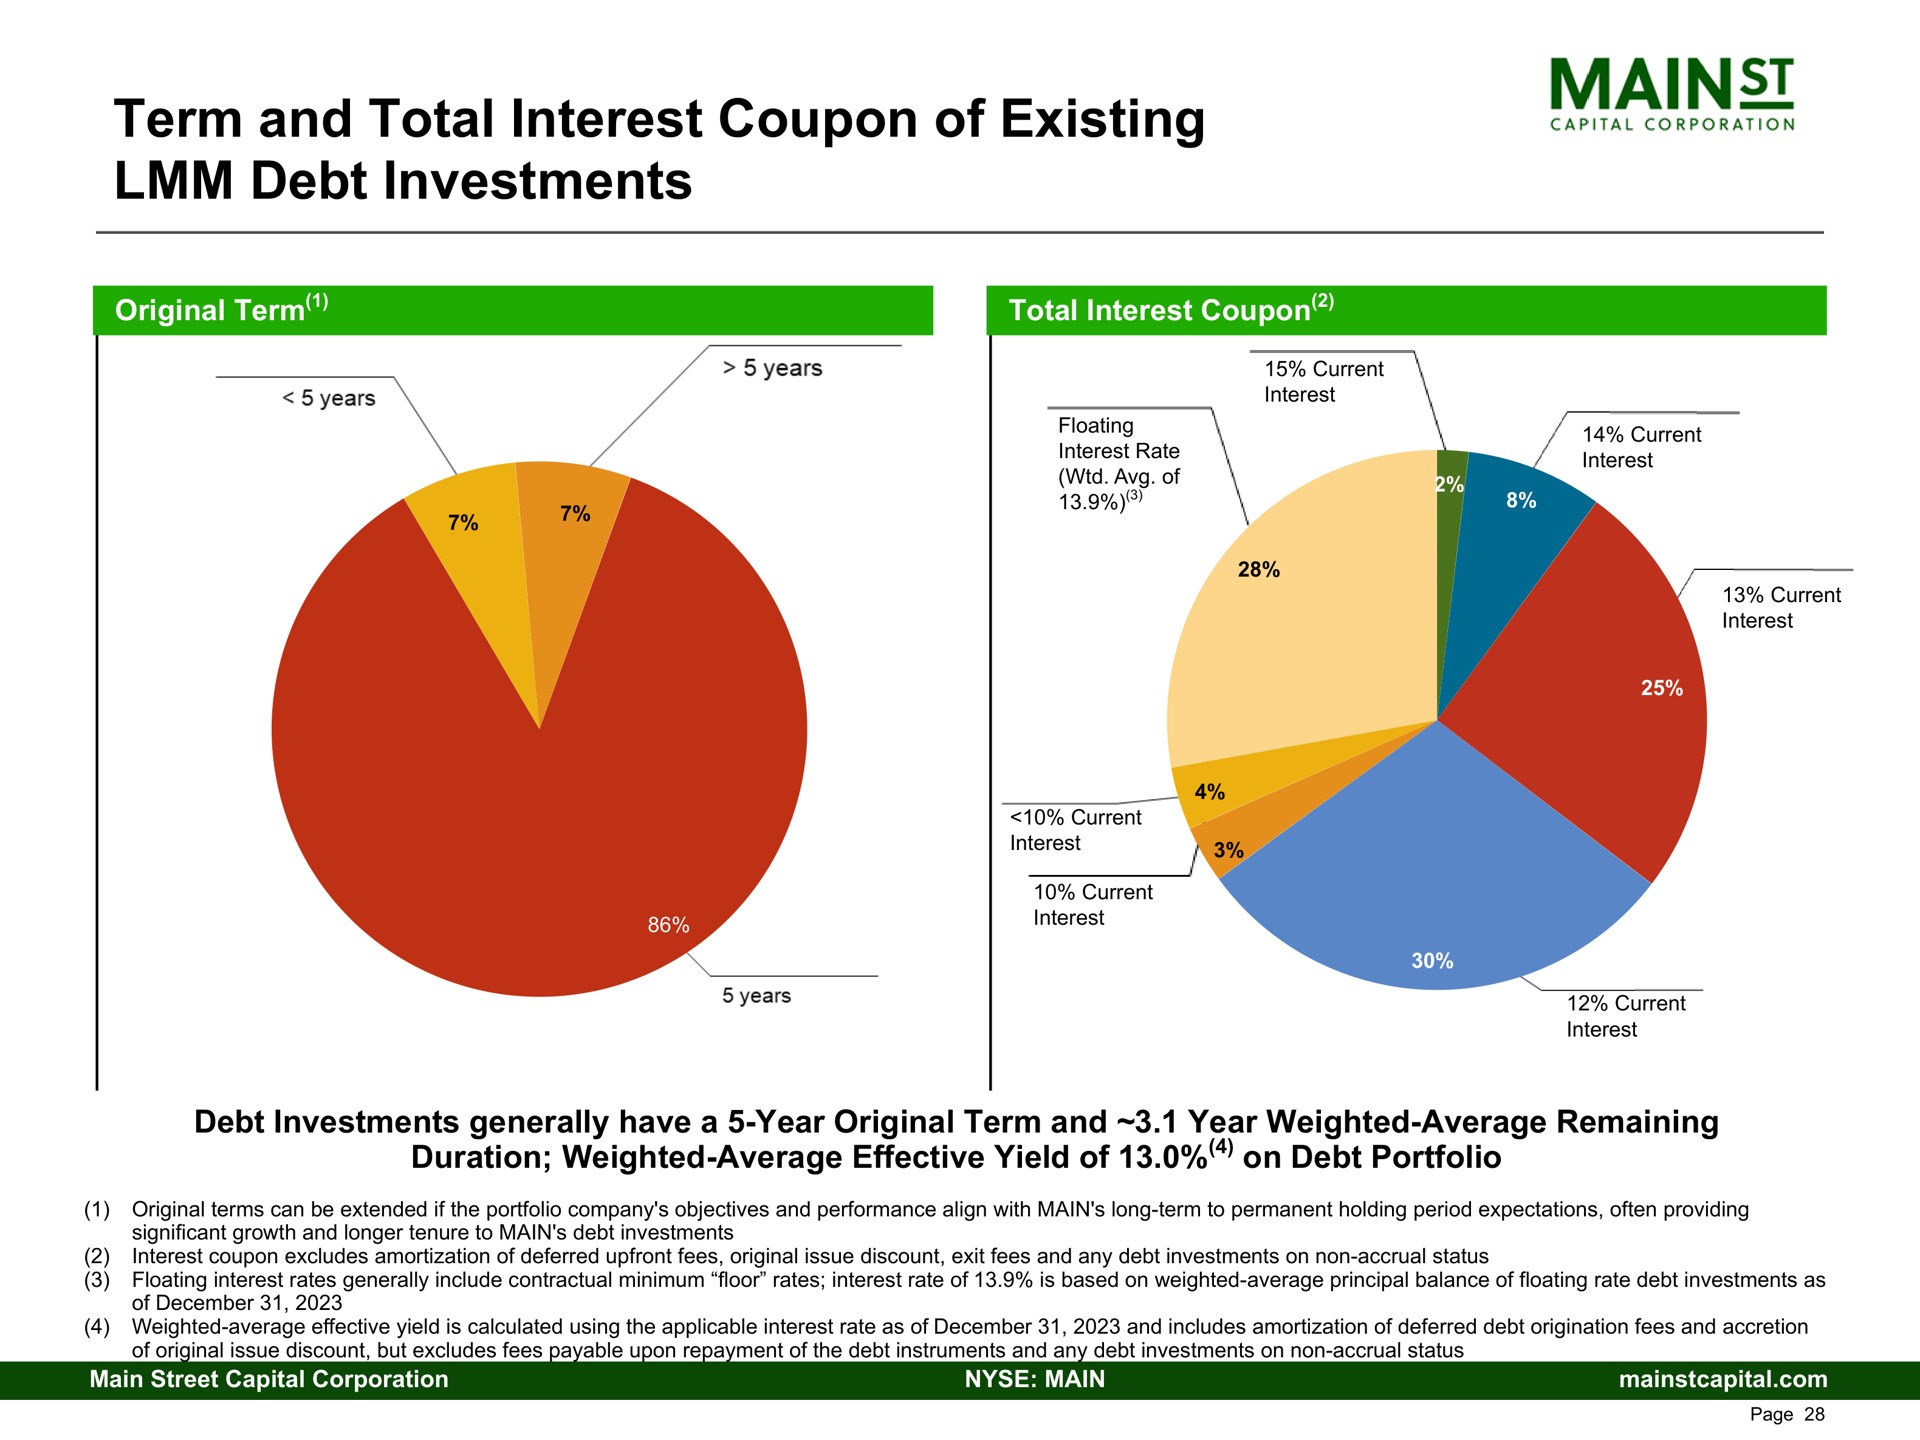 term and total interest coupon of existing debt investments capital corporation | Main Street Capital